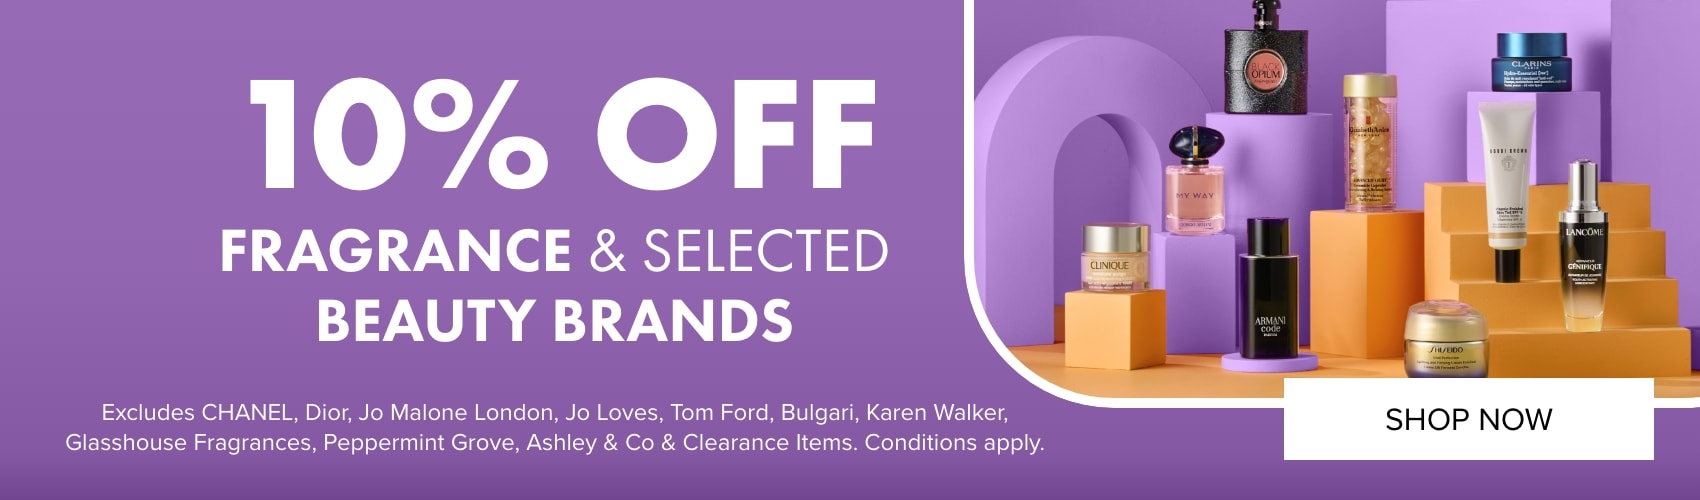 10% OFF Fragrance + Selected Beauty Brands